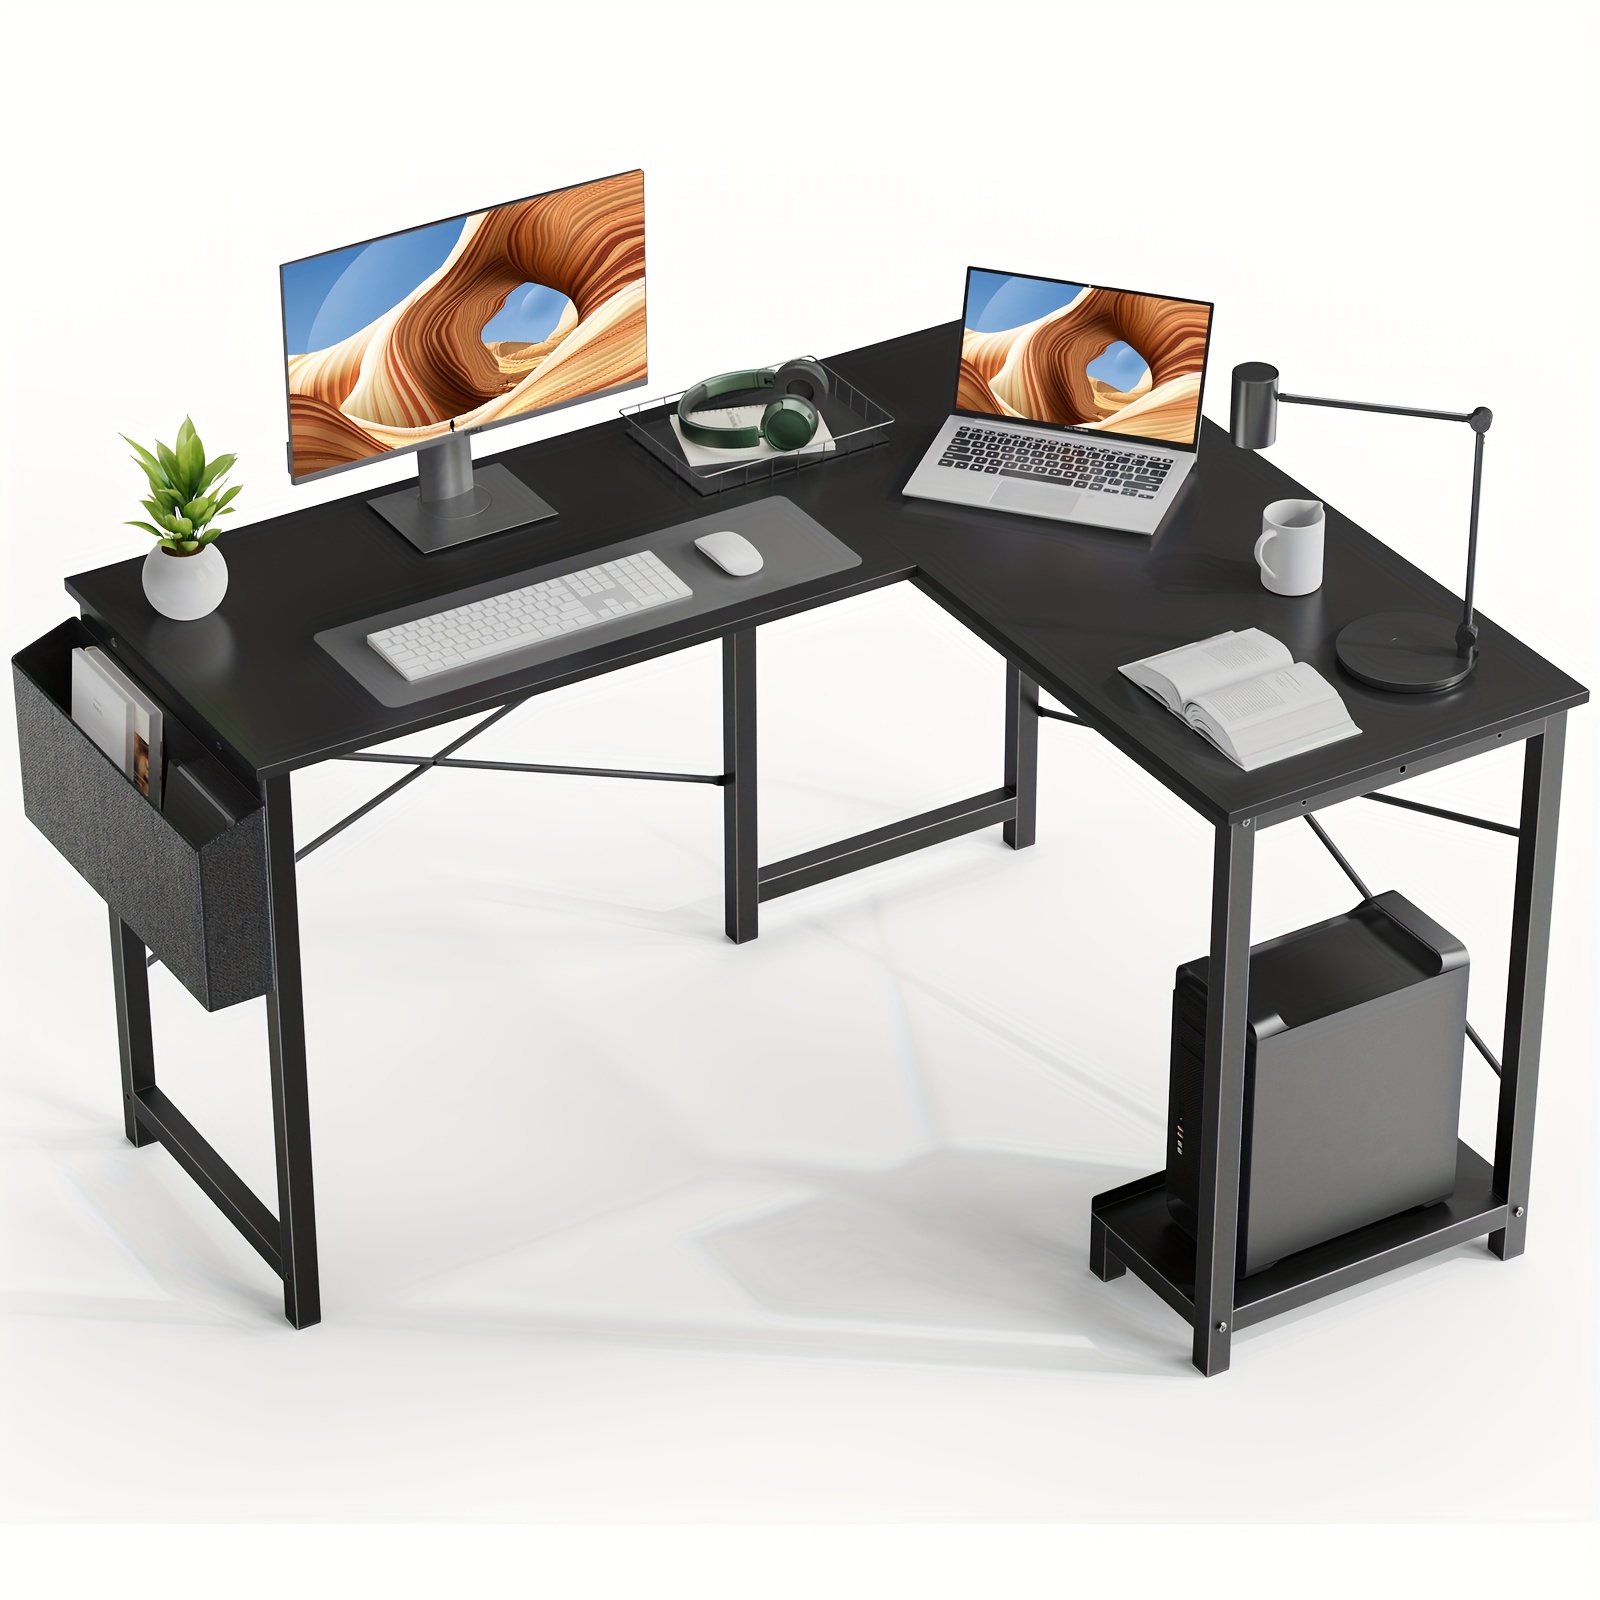 

L Shaped, Computer Corner Pc Sturdy Desk With Side Storage Bag, Gaming Table For Home Office Writing Workstation